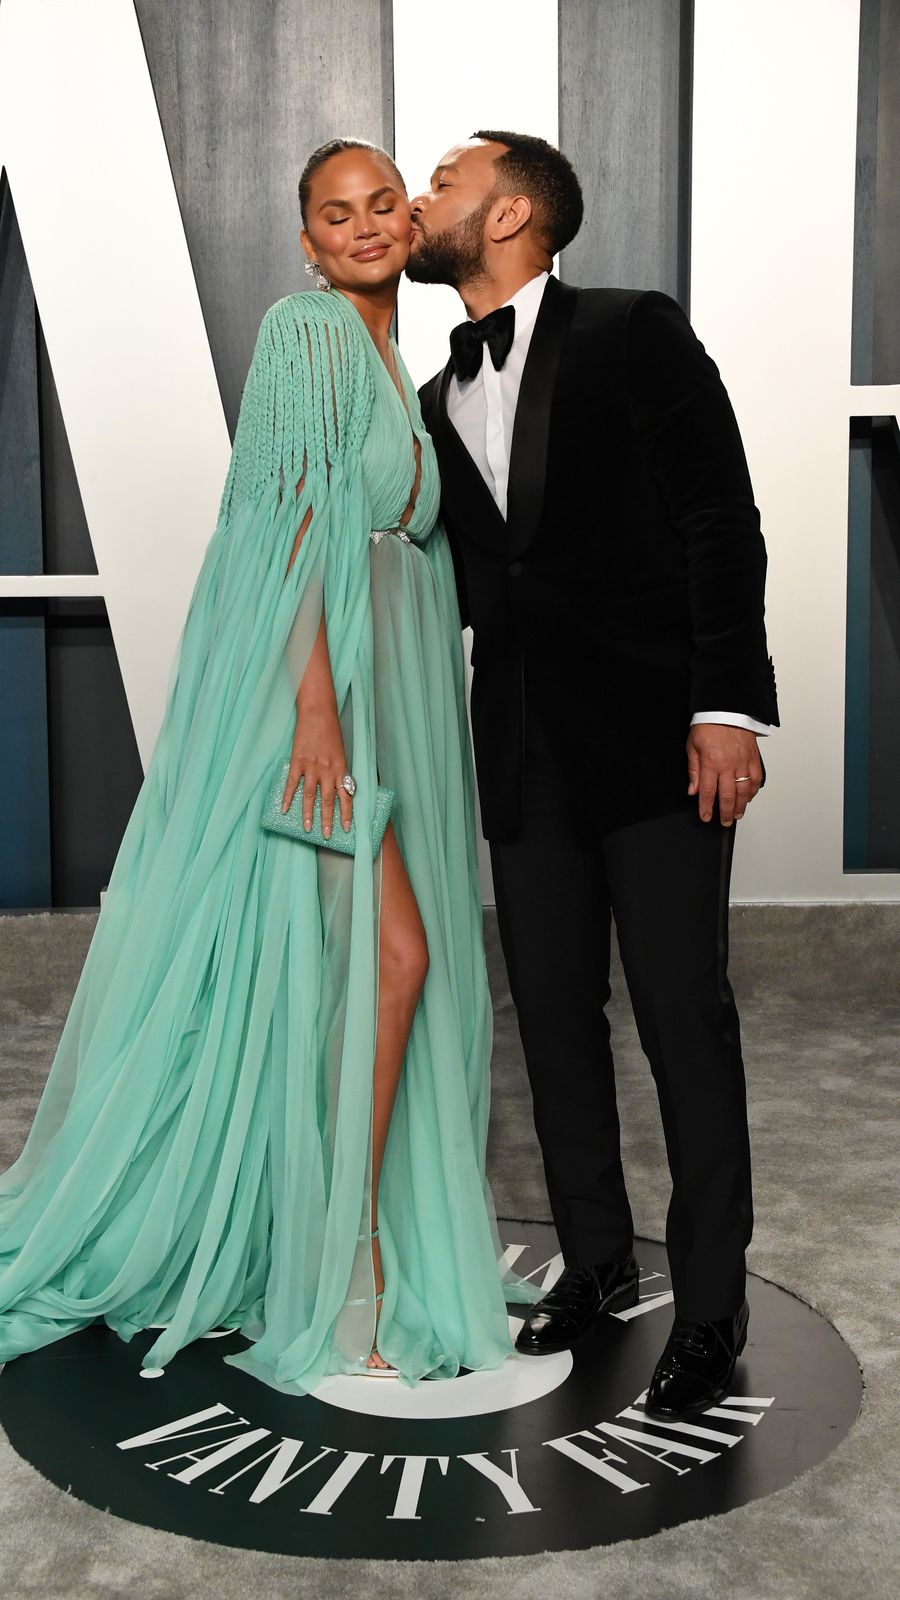 Chrissy Teigen and John Legend at the "Vanity Fair" Oscar Party on February 09, 2020, in Beverly Hills, California | Photo: Jon Kopaloff/WireImage/Getty Images